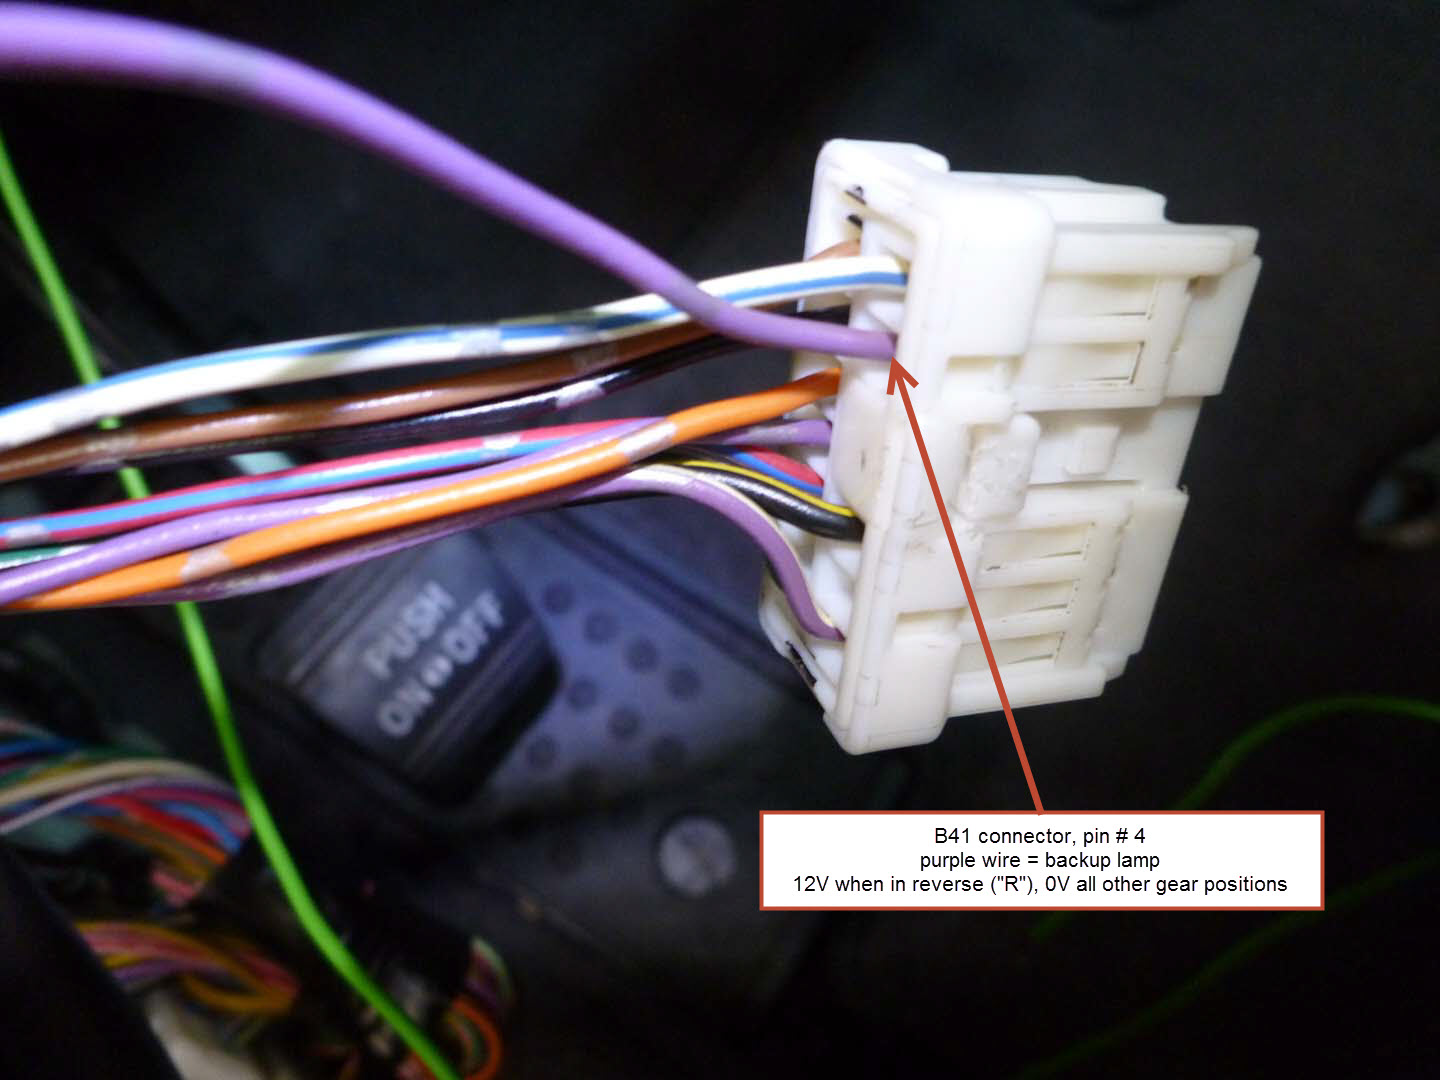 Installing a backup camera -- which harness wire indicates ... toyota blower switch wire harness connectors 